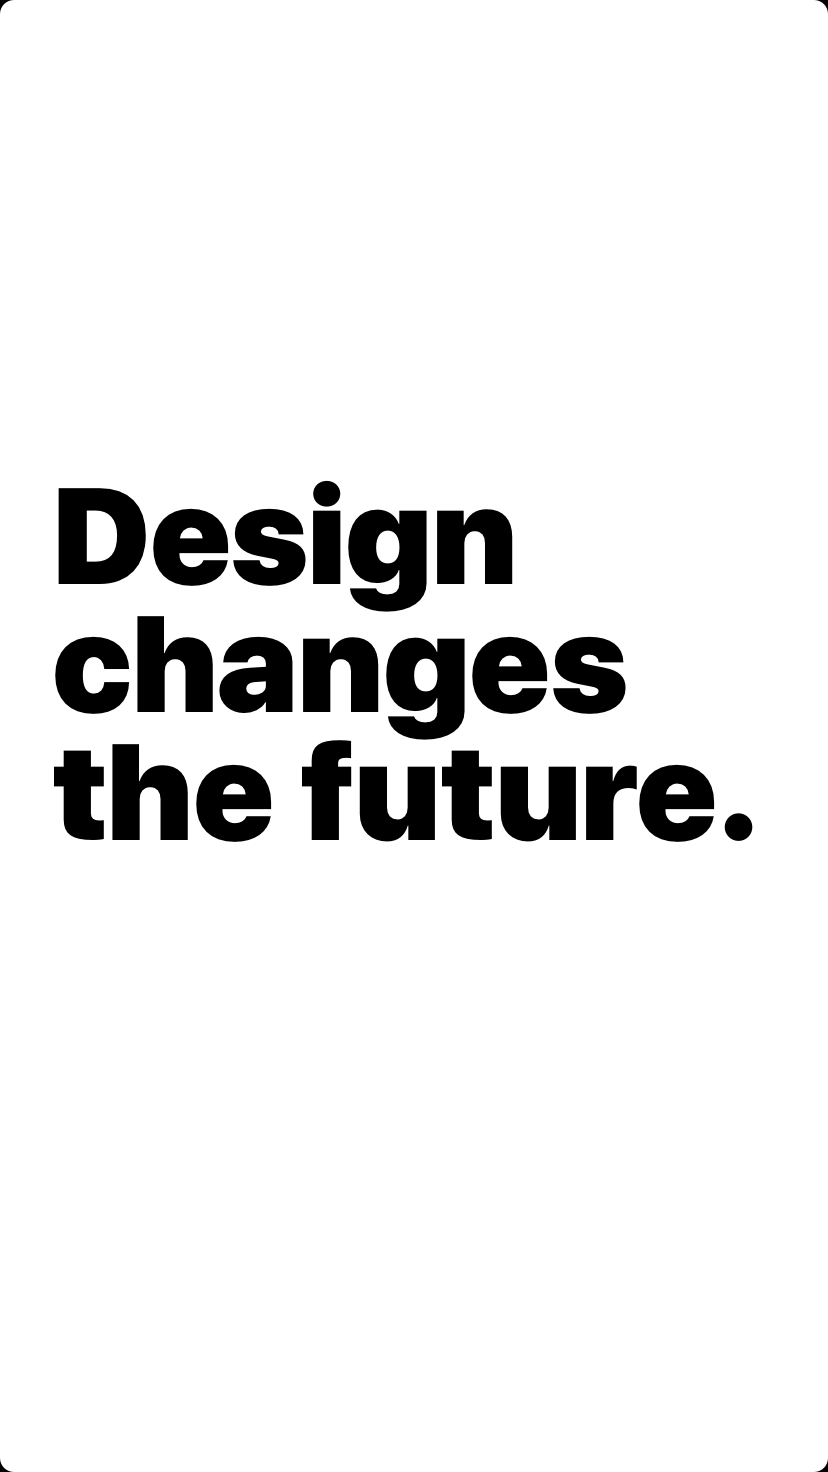 Design changes the future.